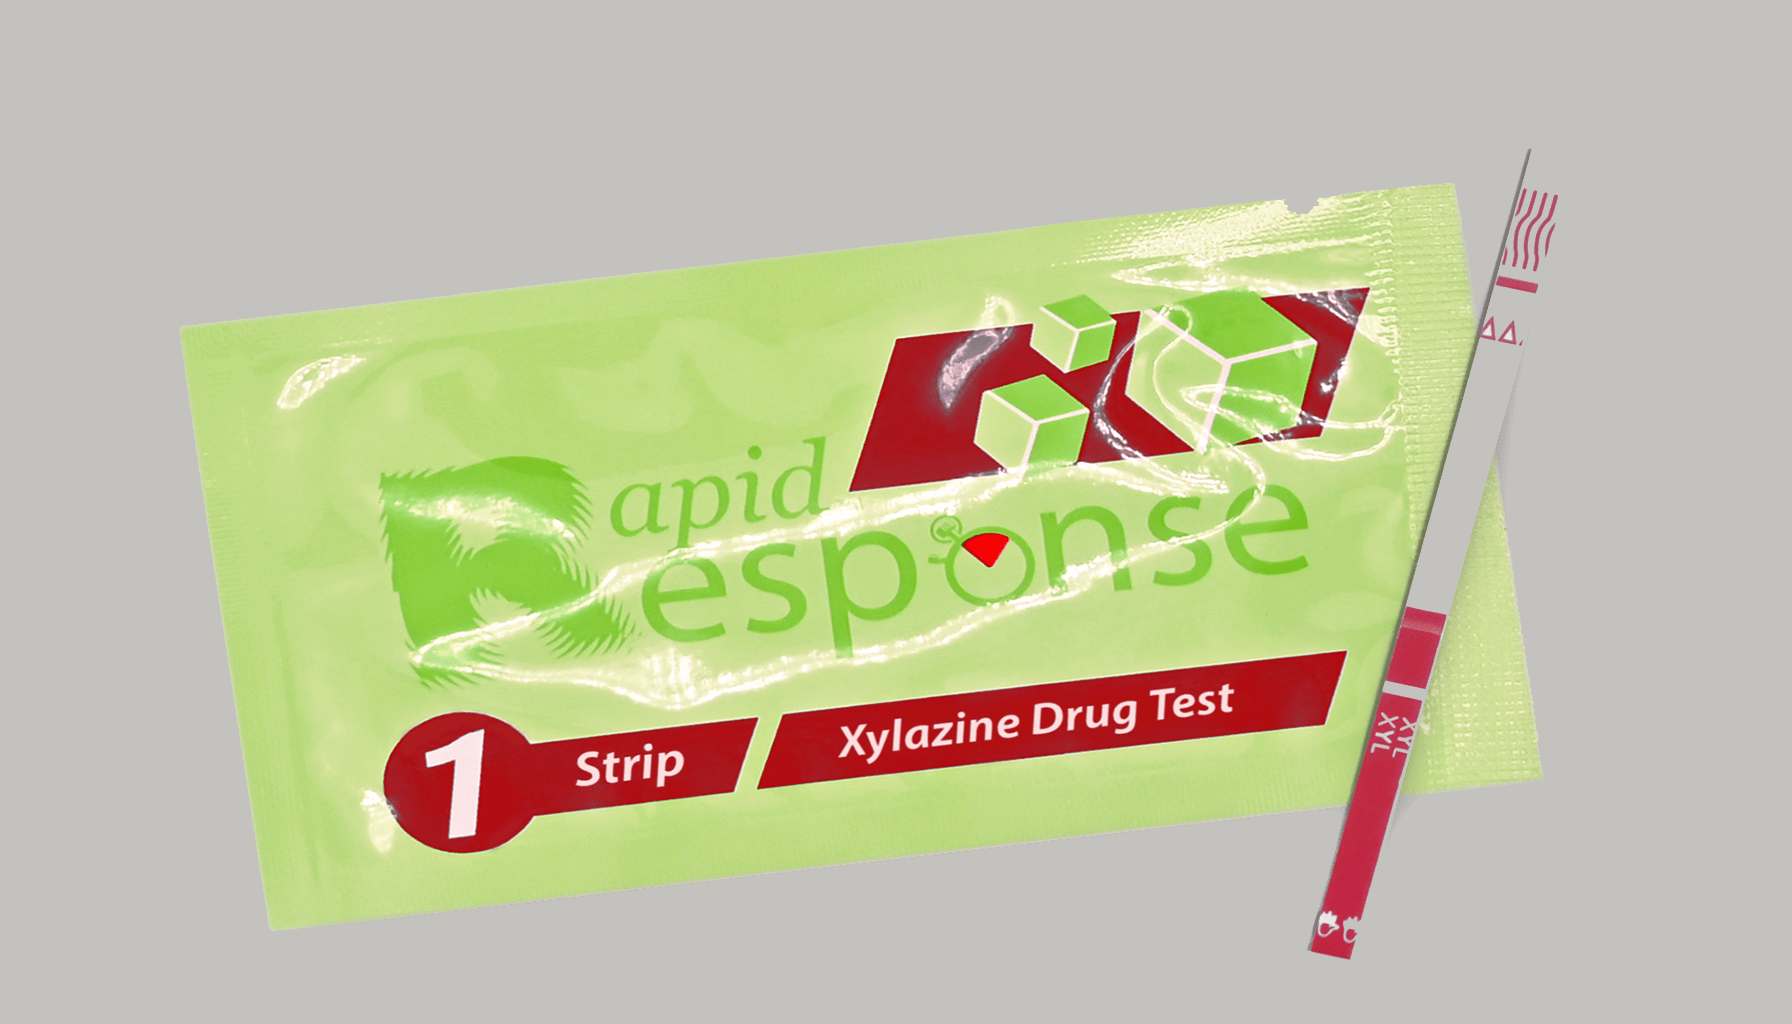 Xylazine Test STrip for Fentanyl Detection News Graphic